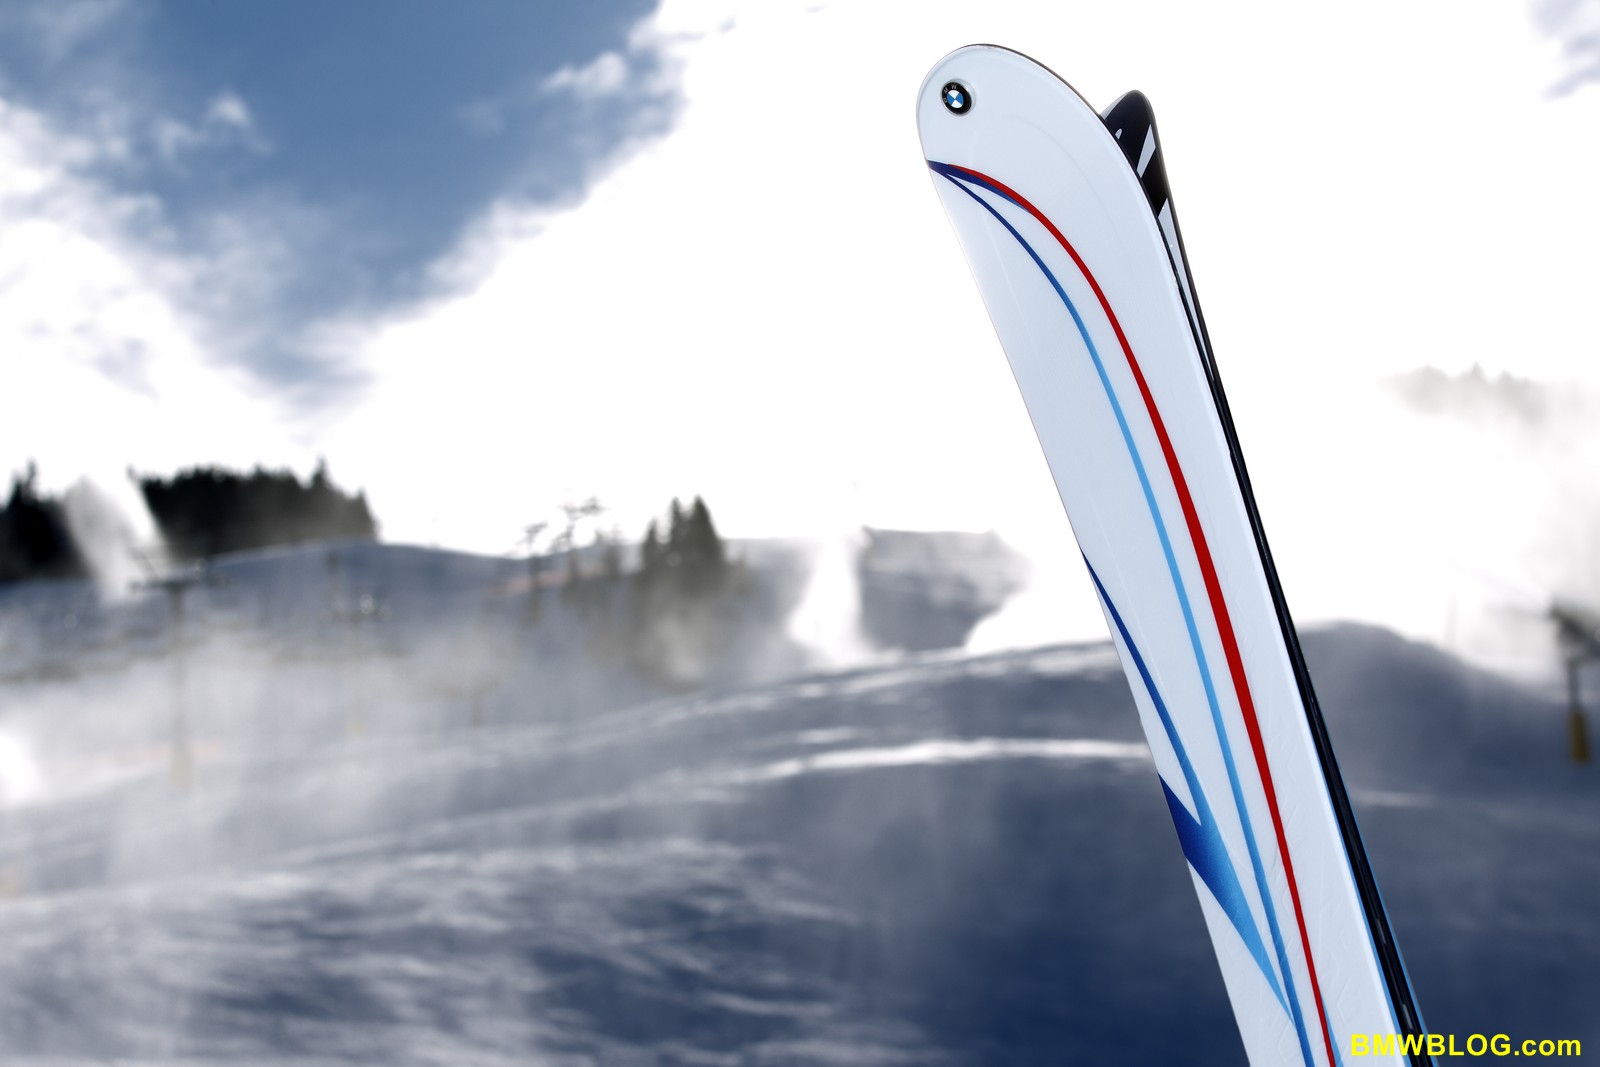 BMW M and K2 join to develop a ski in a class of its own